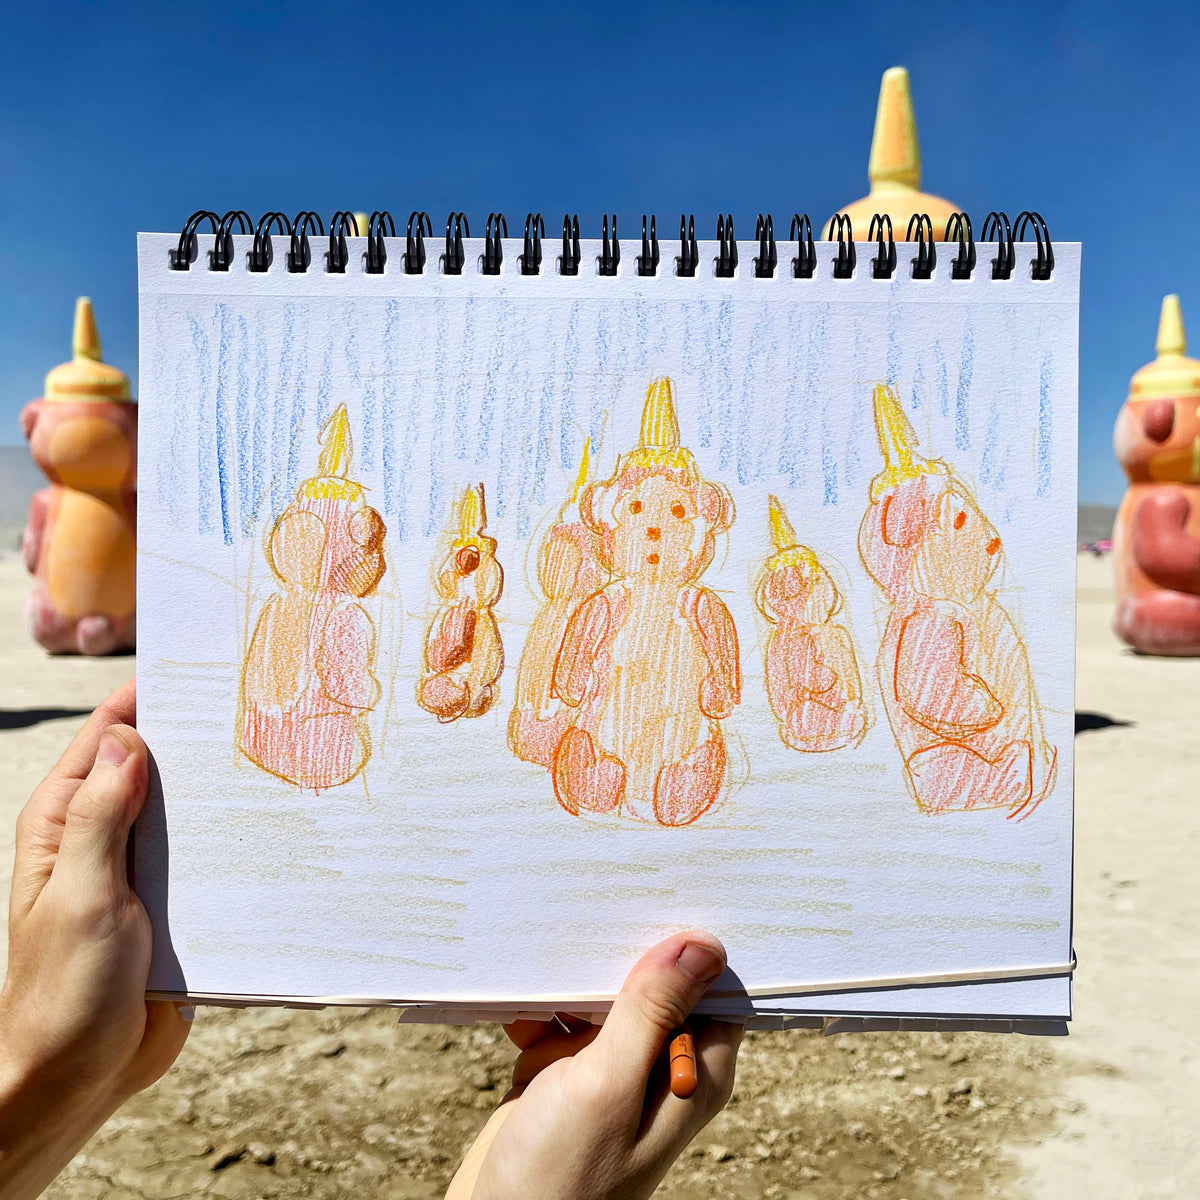 bear inflatables drawing